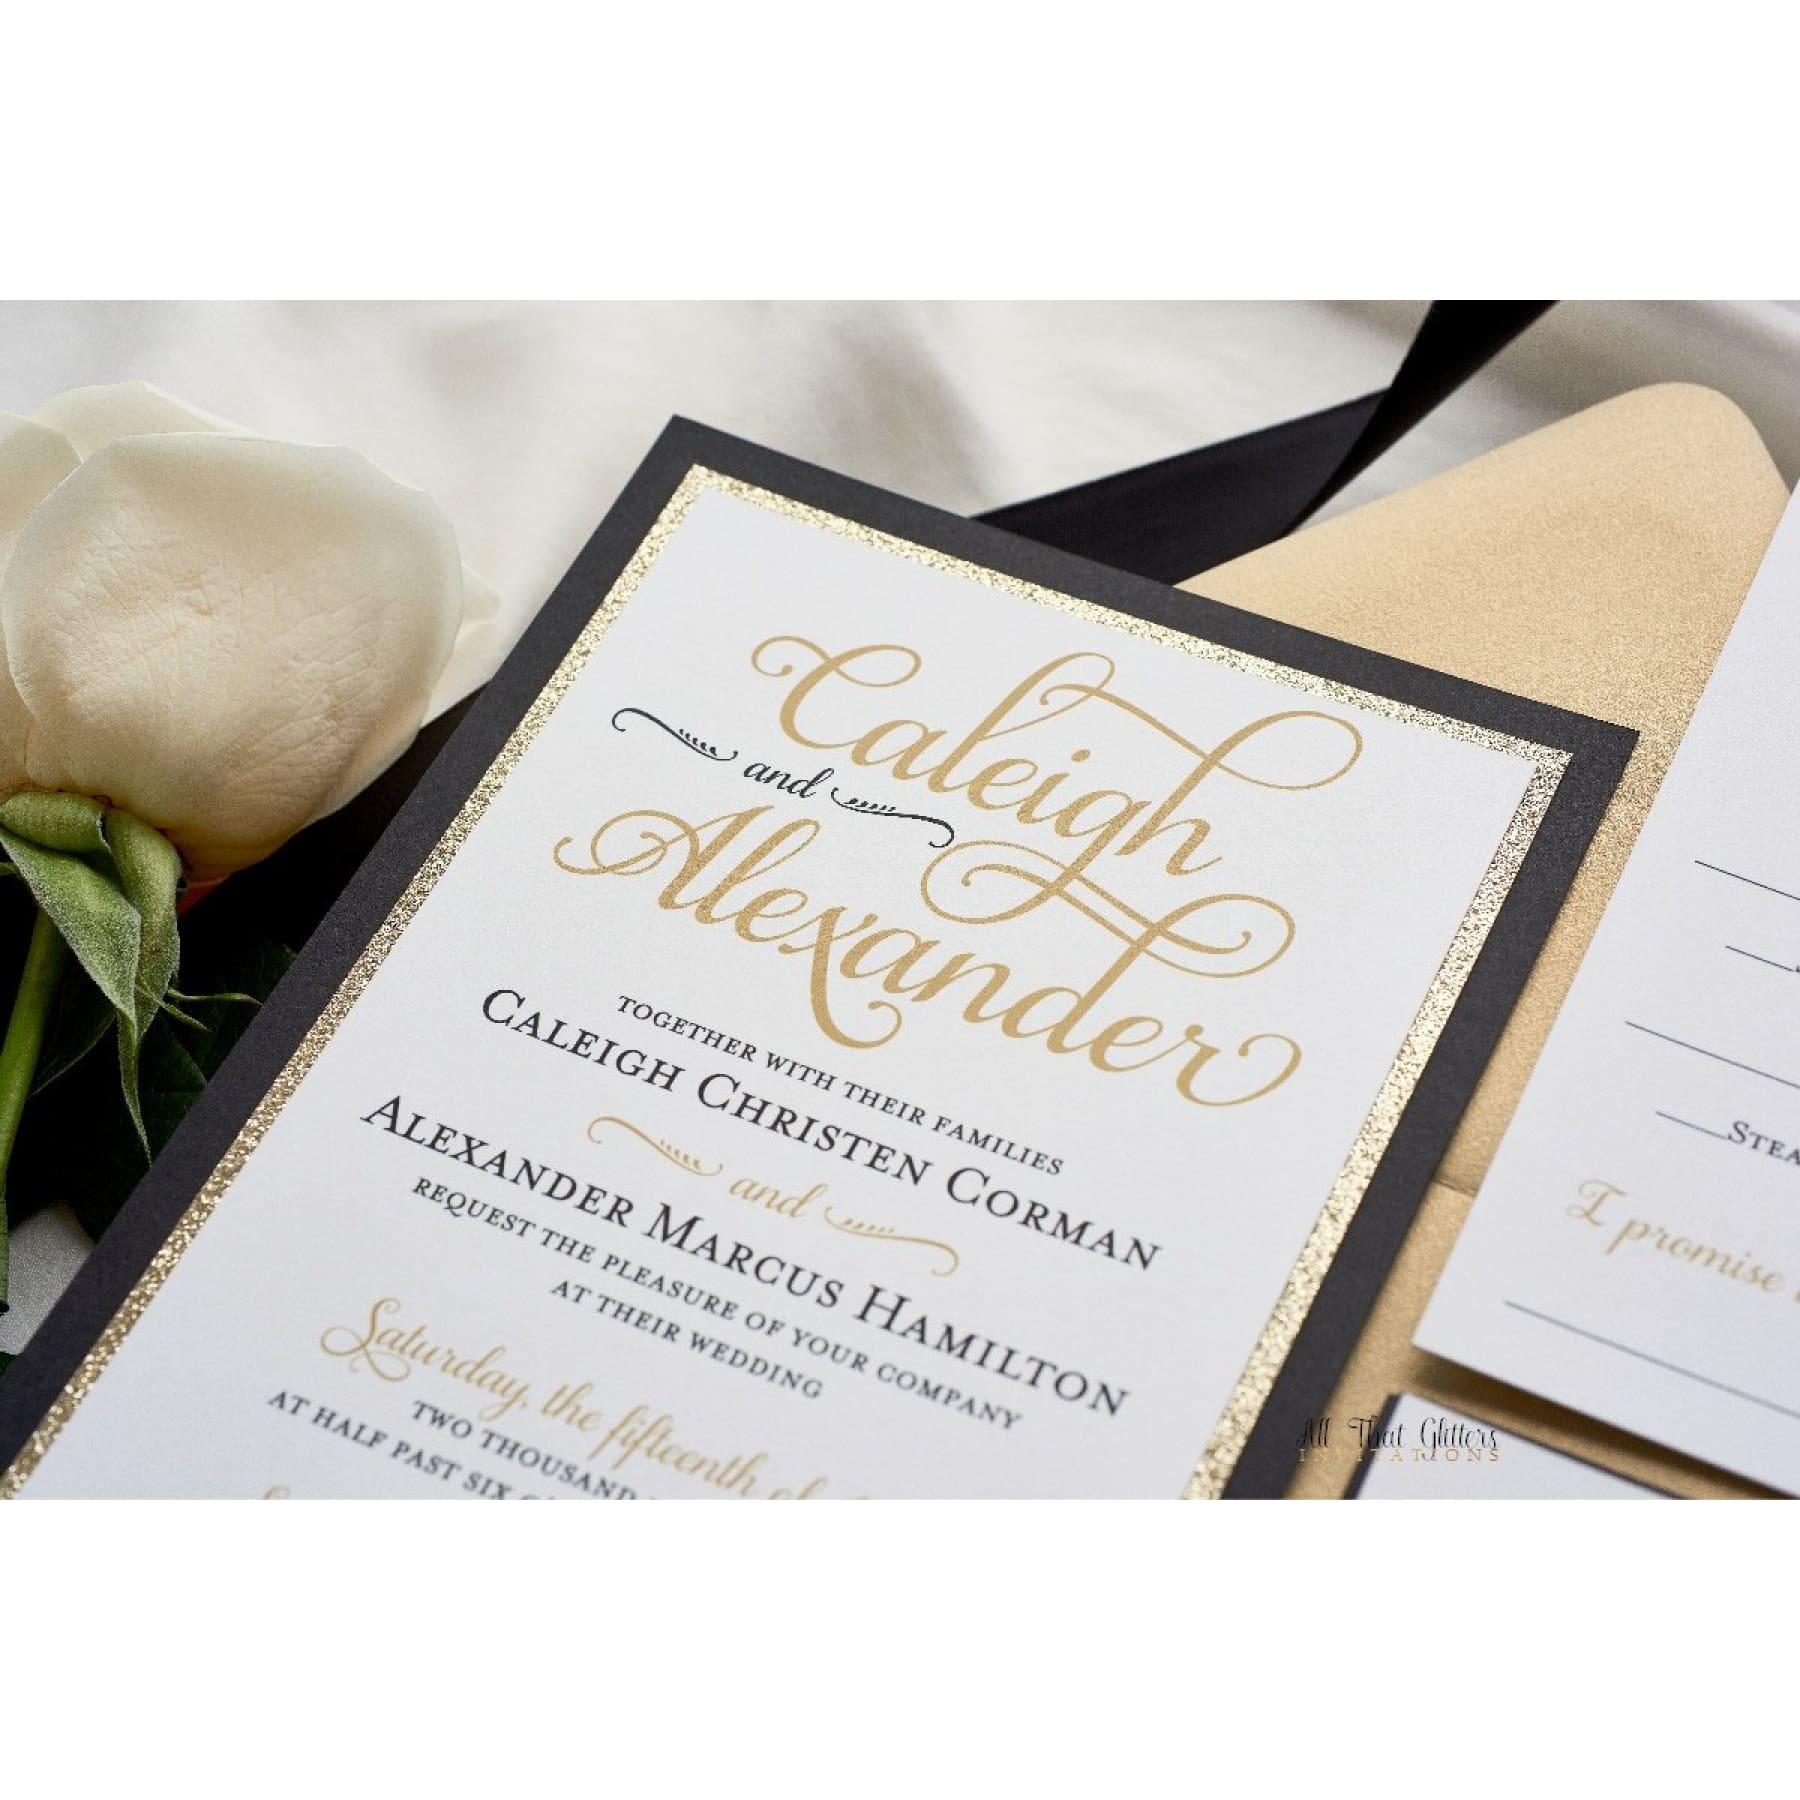 Formal Wedding Invitation with Glitter, Caleigh - All That Glitters Invitations